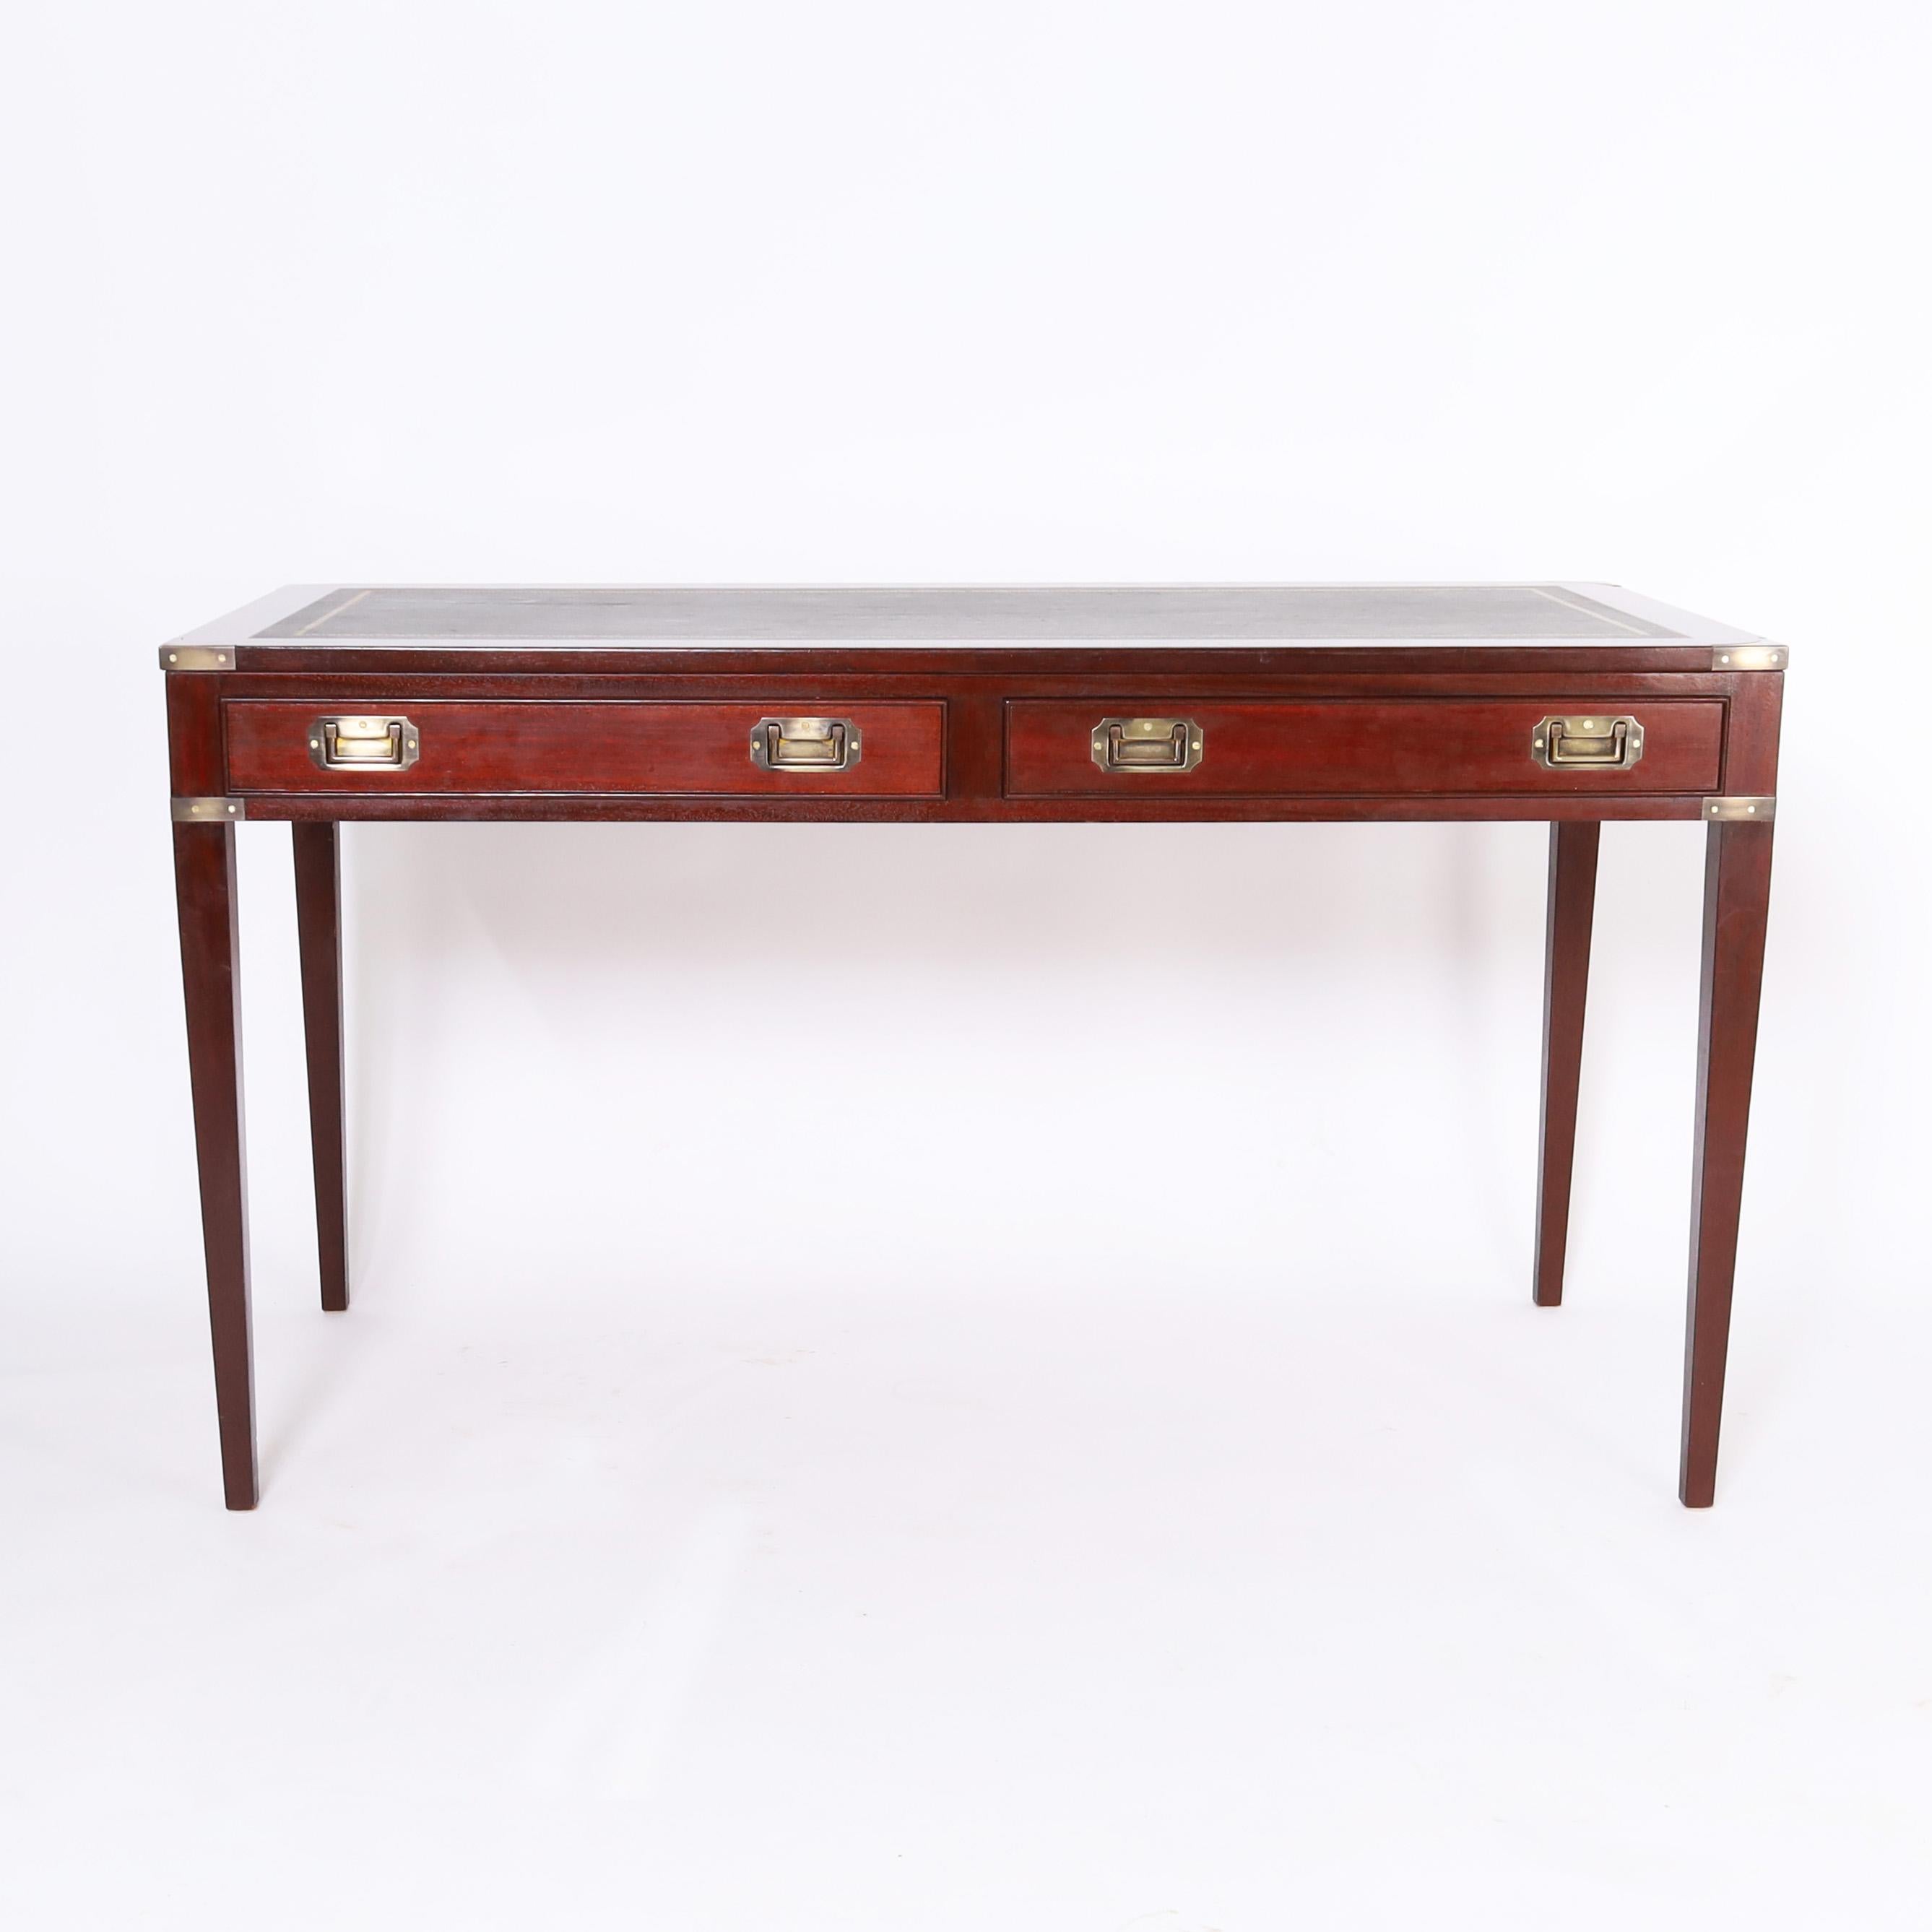 Handsome English Campaign style writing desk crafted in mahogany with a tooled green leather top, brass hardware, two drawers in the case, and elegant tapered legs. 